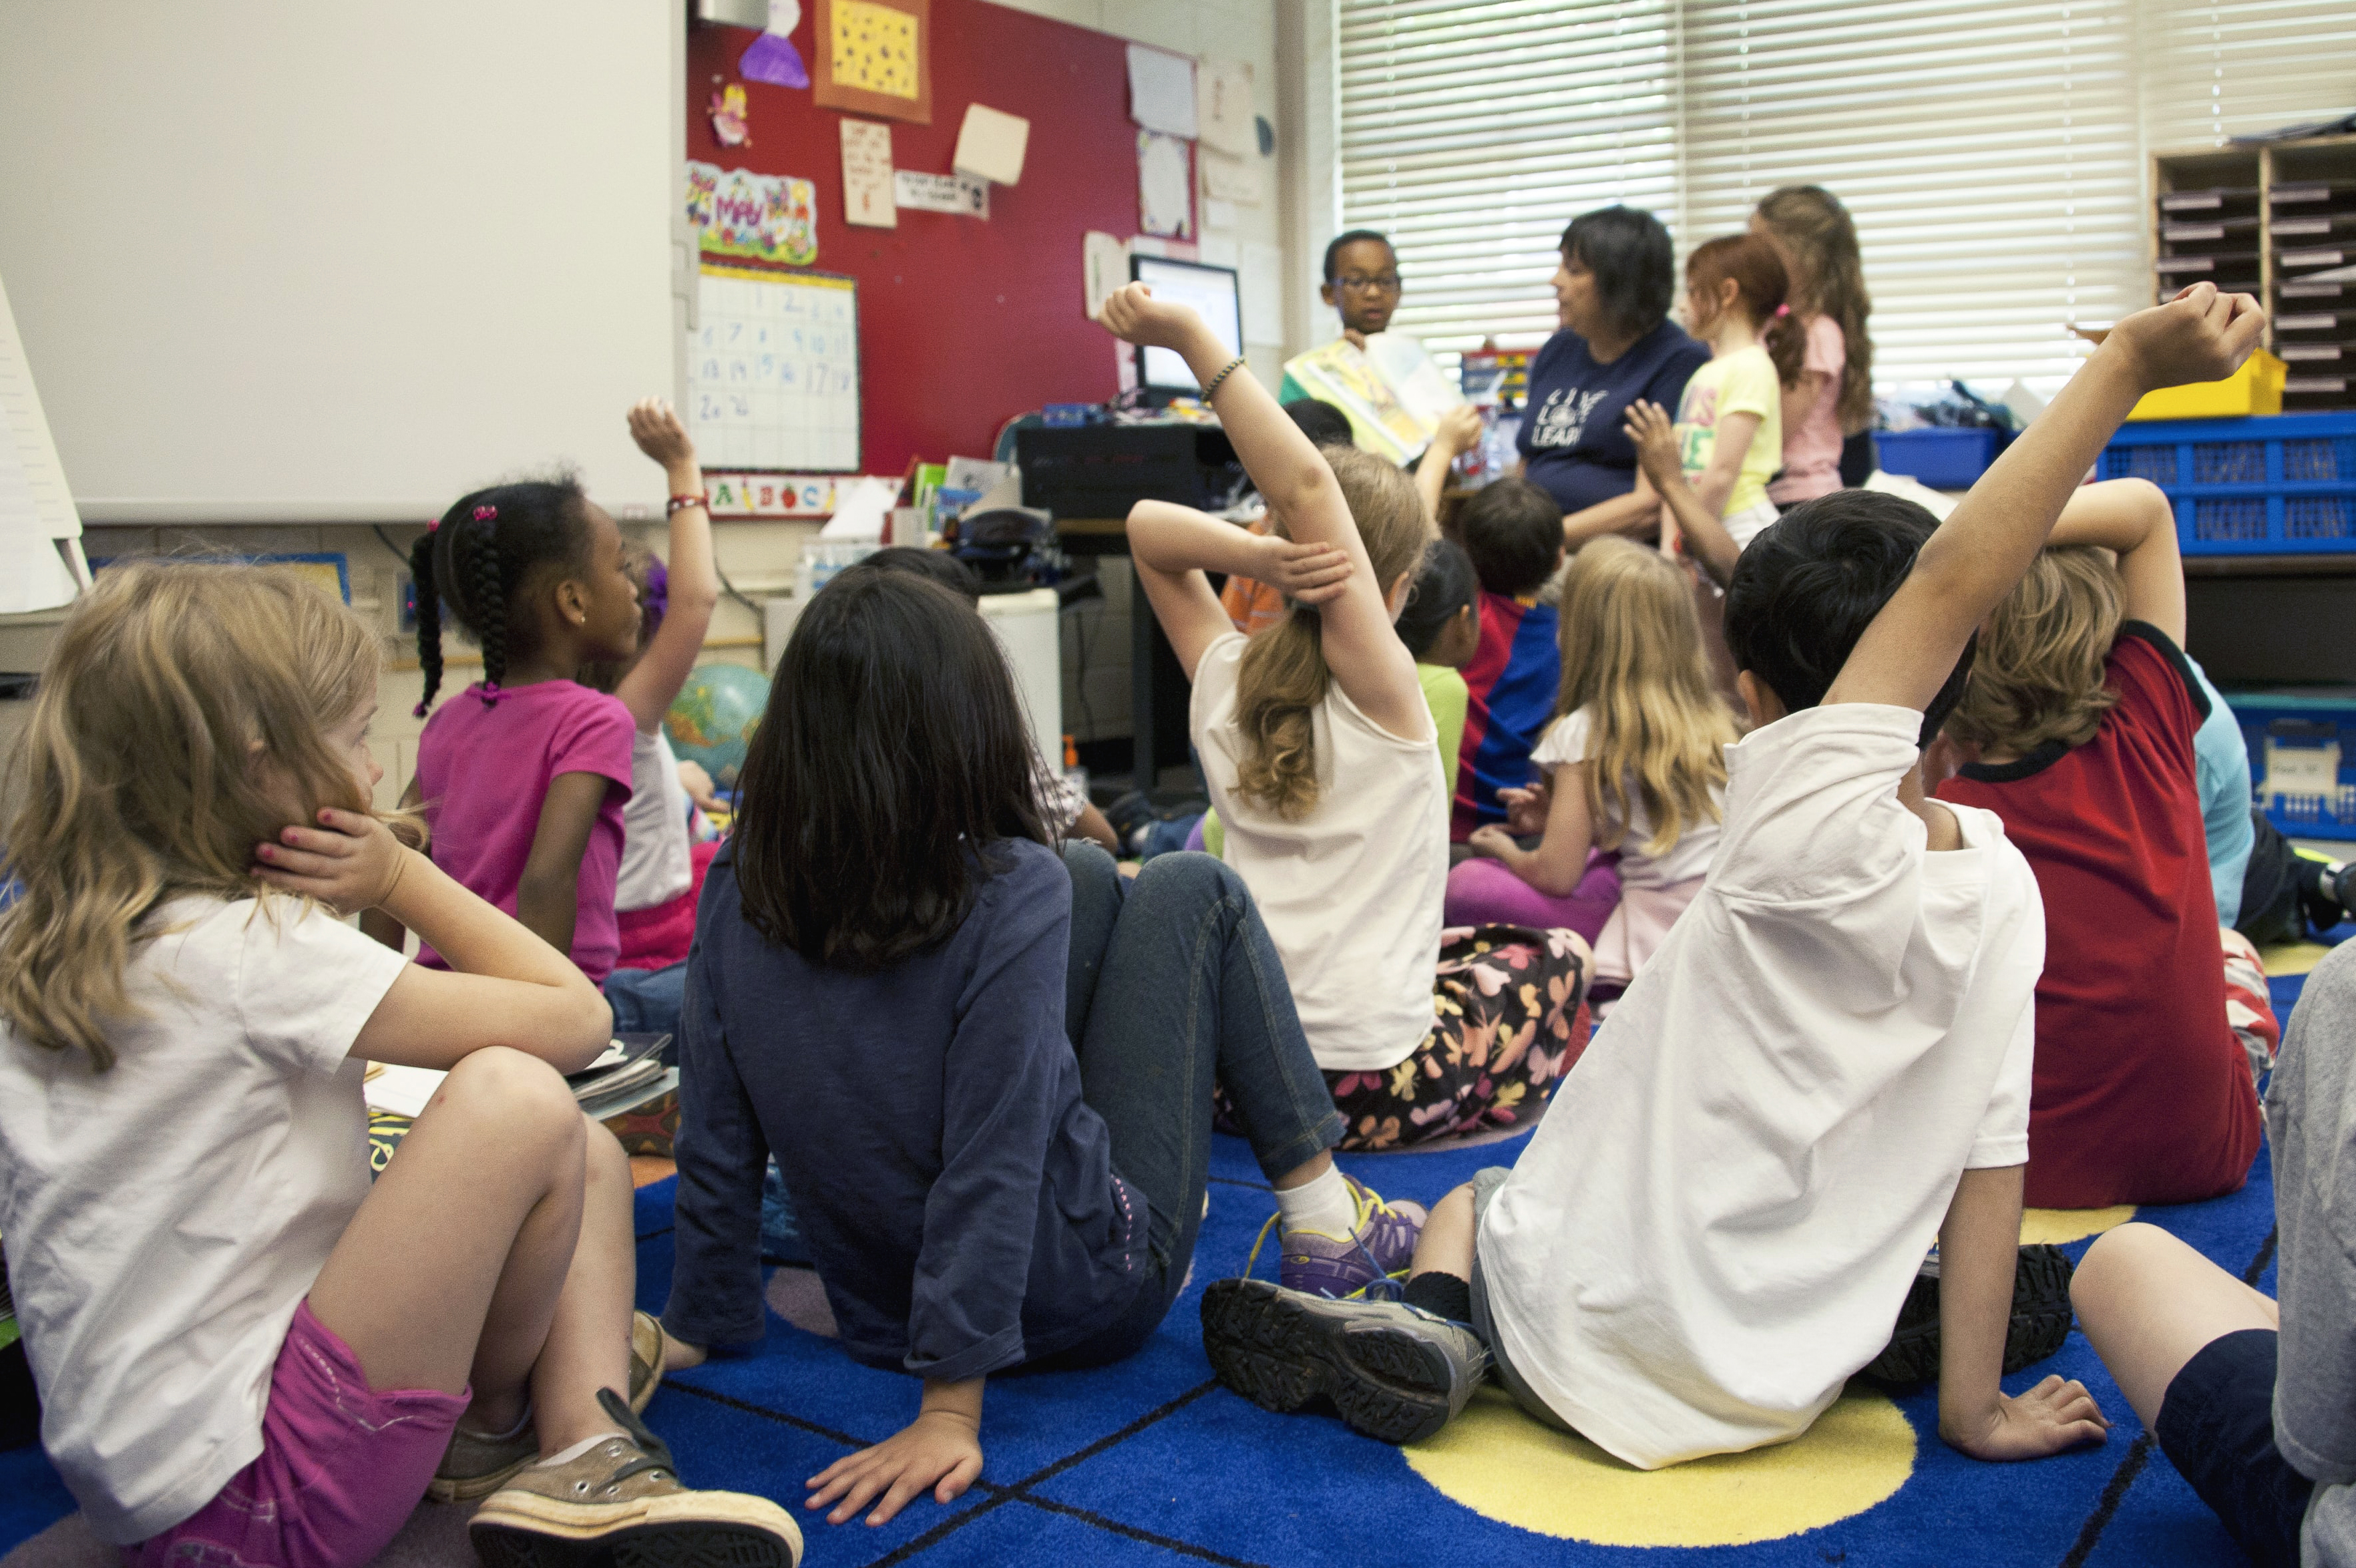 Early education classroom. Foreground includes children seated on the floor, backs to the camera, several with their hands raised. Background shows teacher surrounded by three students, one of whom is holding up a book for the class. 